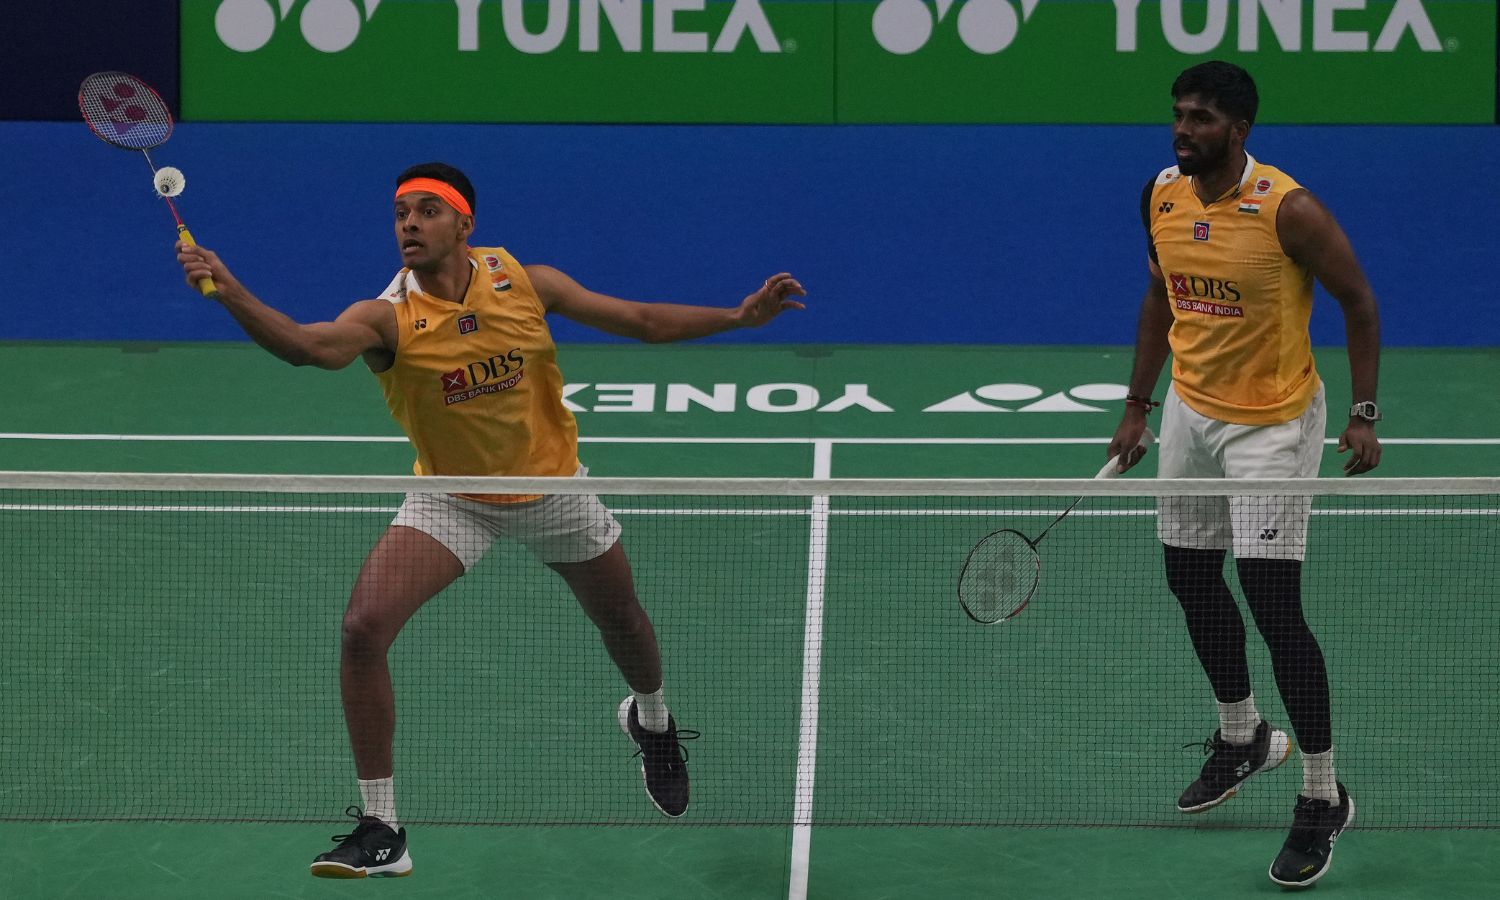 You are currently viewing India open Live: Satwik-Chirag in action-Blog, Scores, Updates, Results